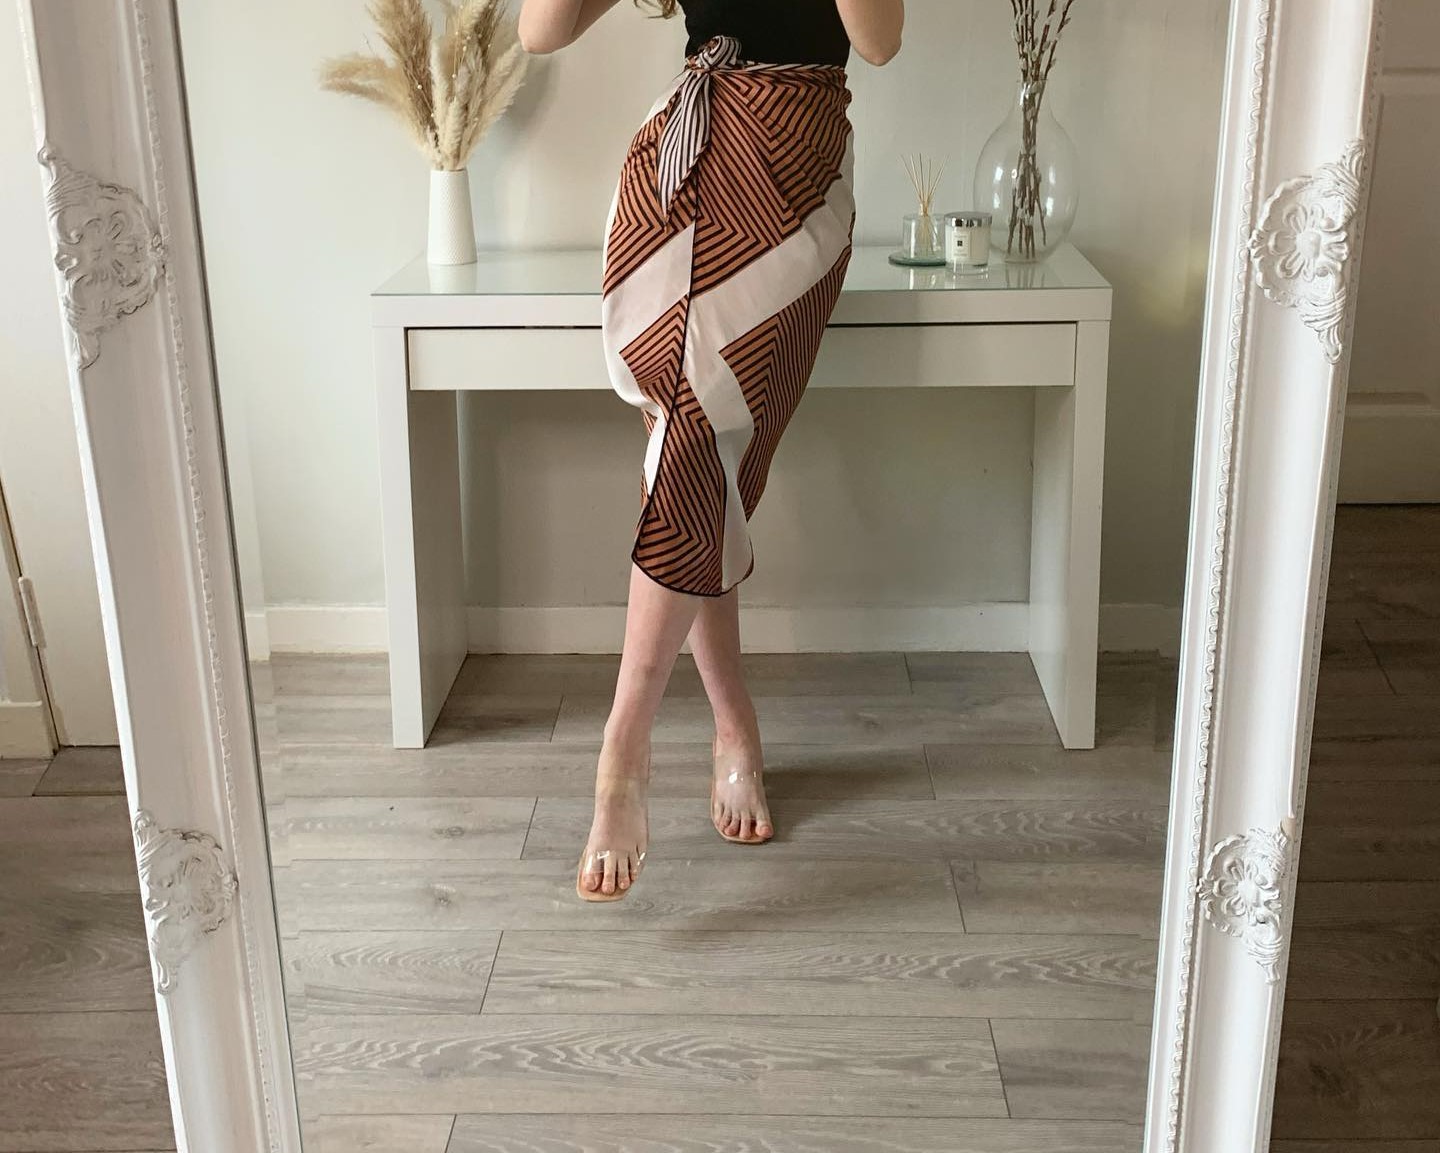 A woman is dressed in a gorgeous wrap skirt